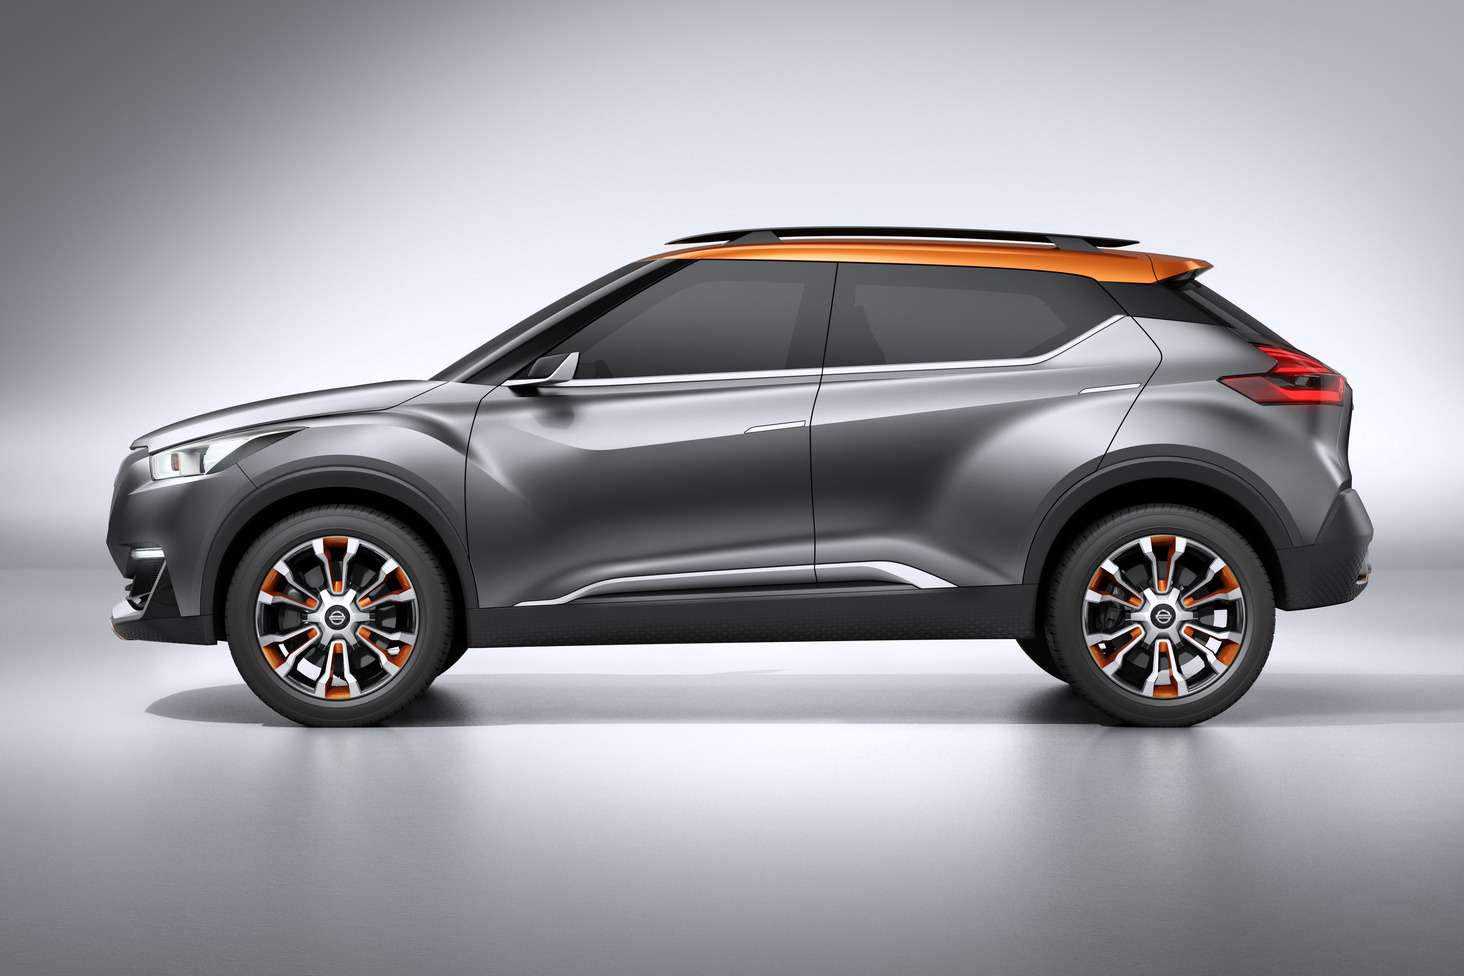 nissan-kicks-suv-to-debut-in-2016-as-the-official-car-of-the-olympics-in-rio-de-janeiro_24